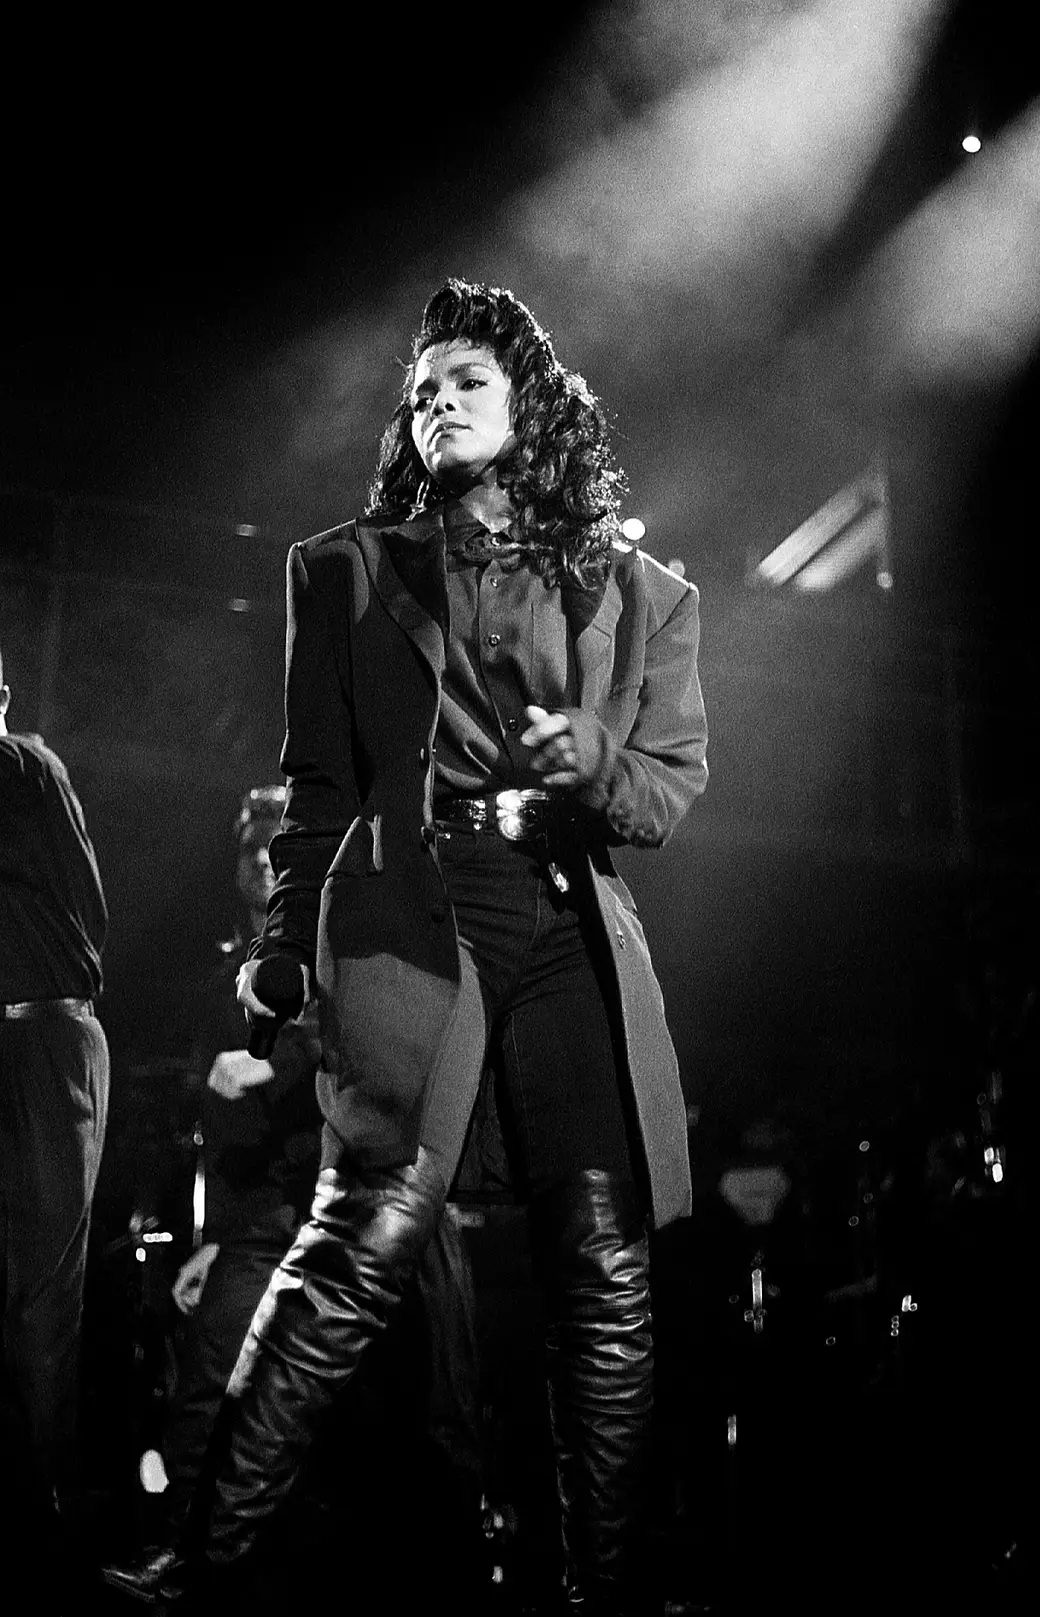 Singer Janet Jackson performs during her Rhythm Nation tour at the Cincinnati Coliseum in 1990.